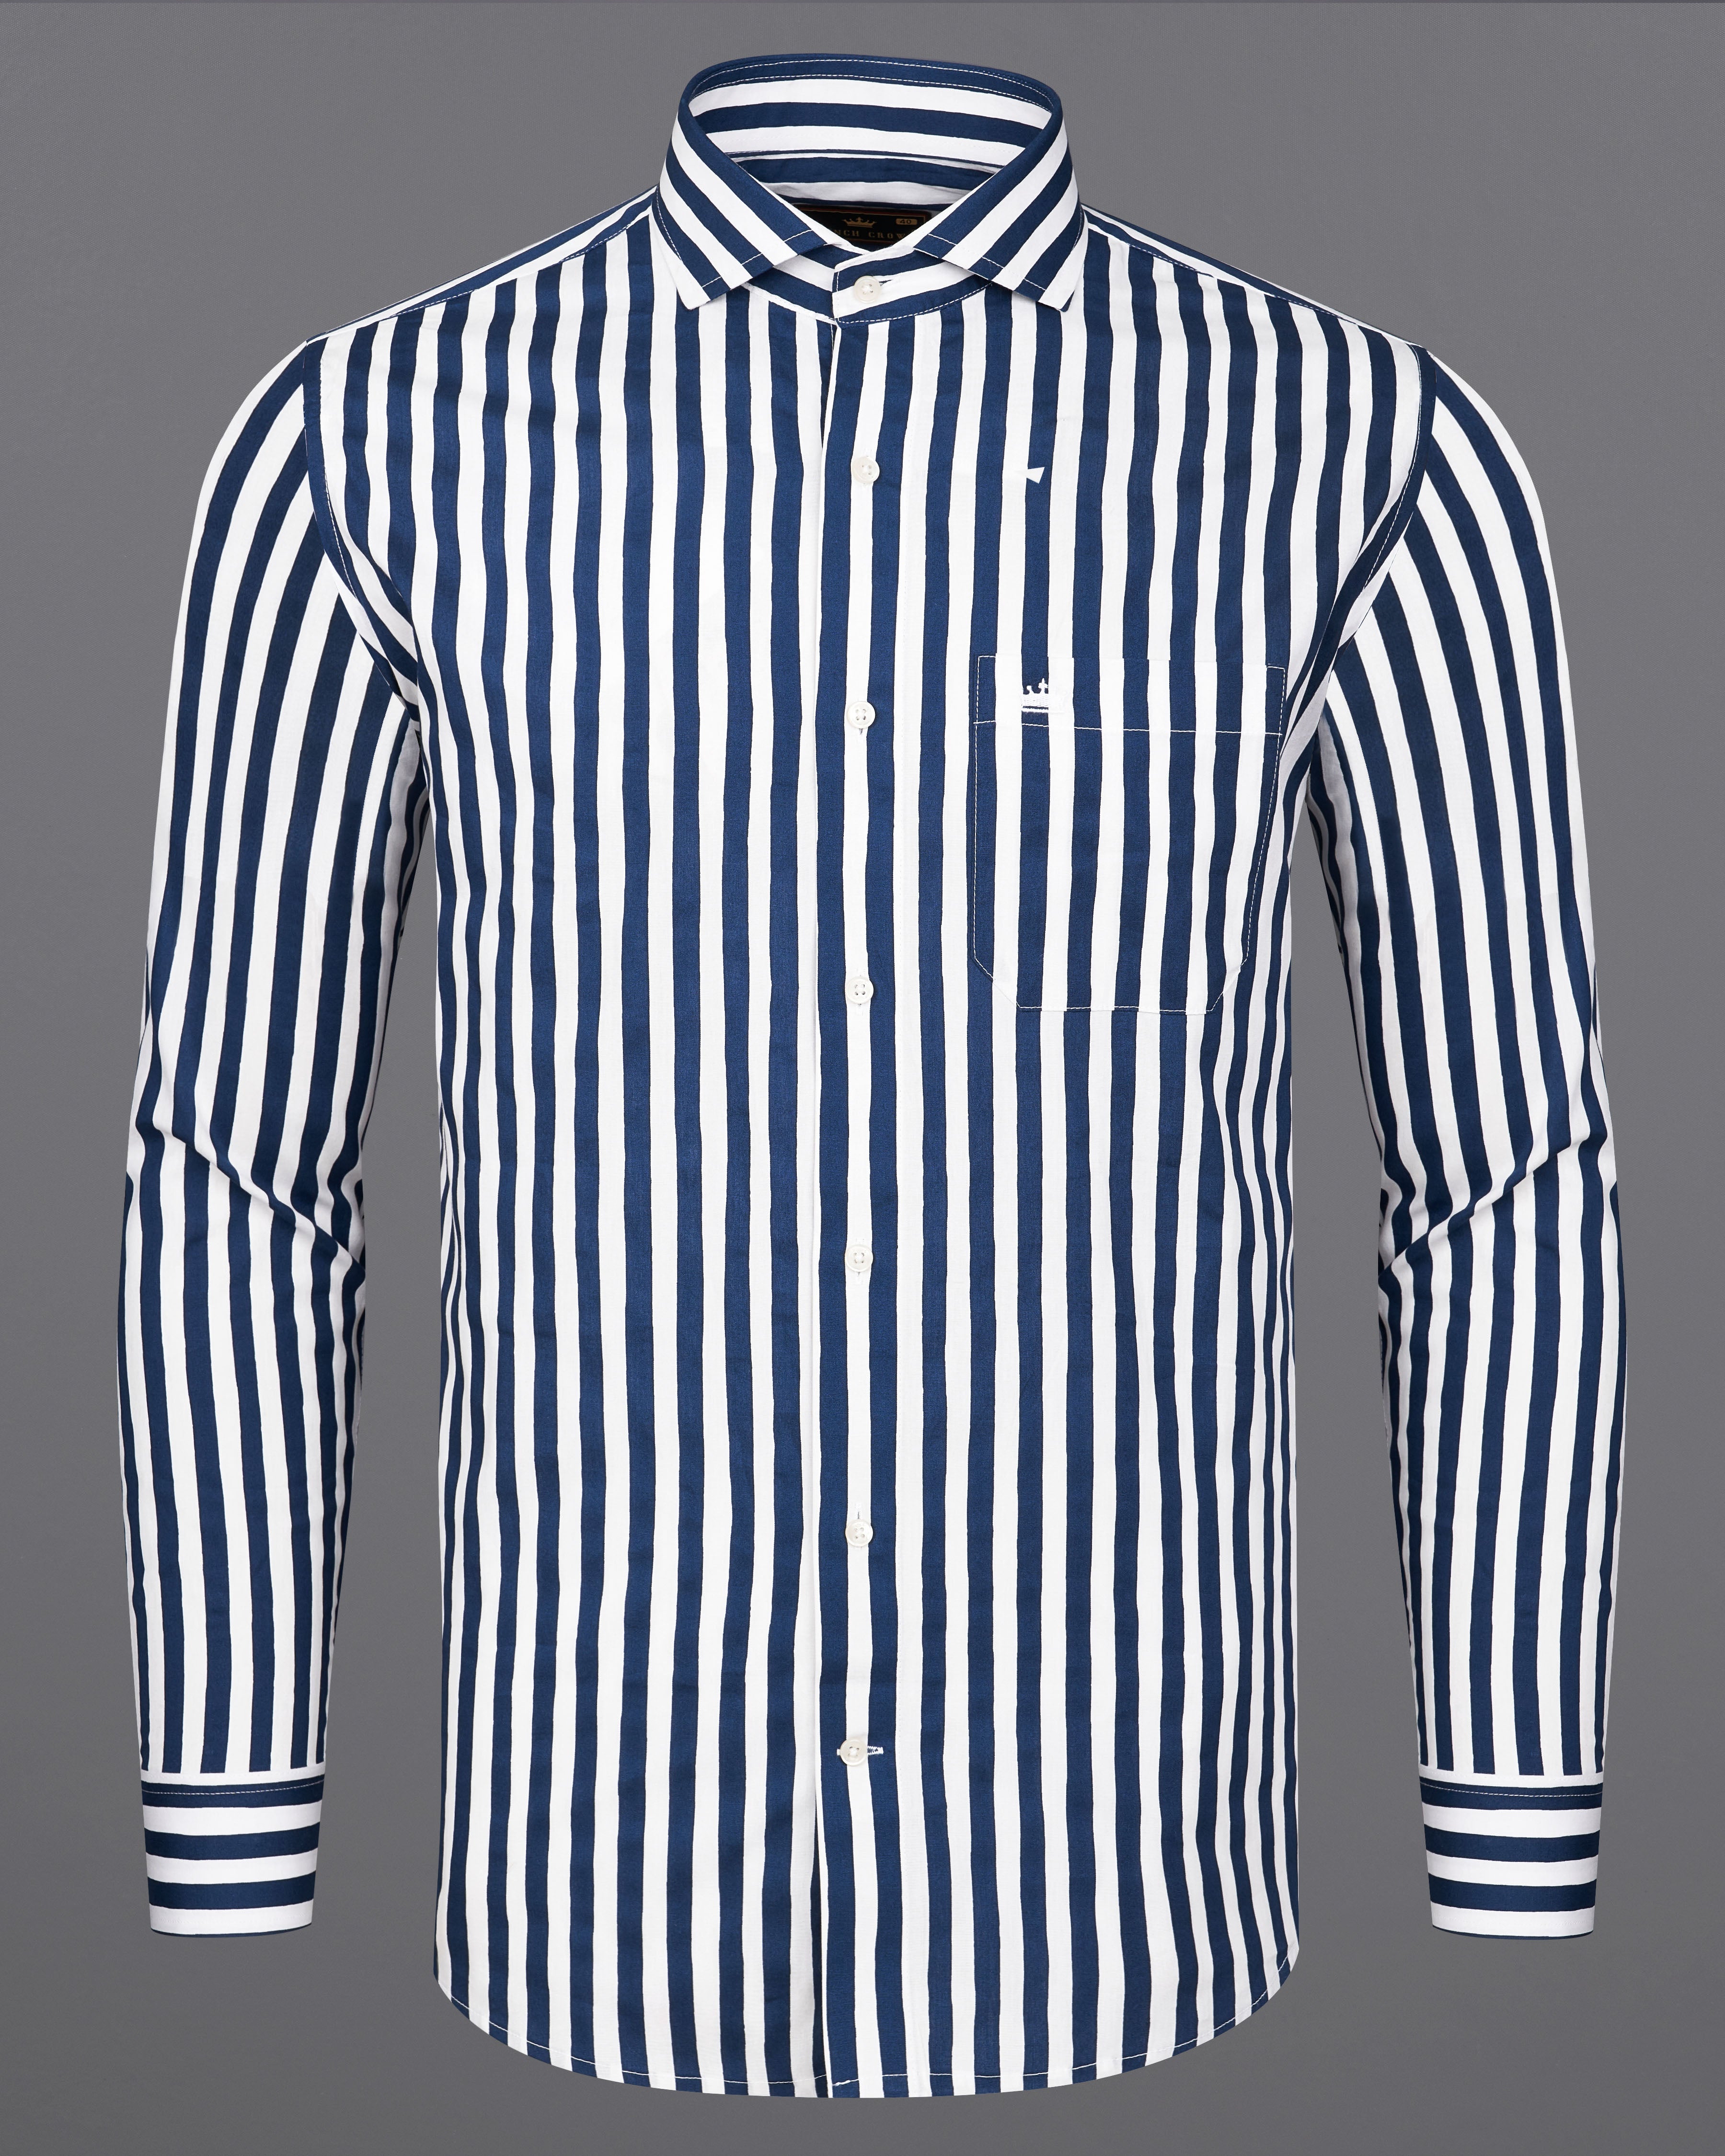 Bright White and Midnight Navy Blue Striped Premium Cotton Shirt 9149-CA-38,9149-CA-H-38,9149-CA-39,9149-CA-H-39,9149-CA-40,9149-CA-H-40,9149-CA-42,9149-CA-H-42,9149-CA-44,9149-CA-H-44,9149-CA-46,9149-CA-H-46,9149-CA-48,9149-CA-H-48,9149-CA-50,9149-CA-H-50,9149-CA-52,9149-CA-H-52